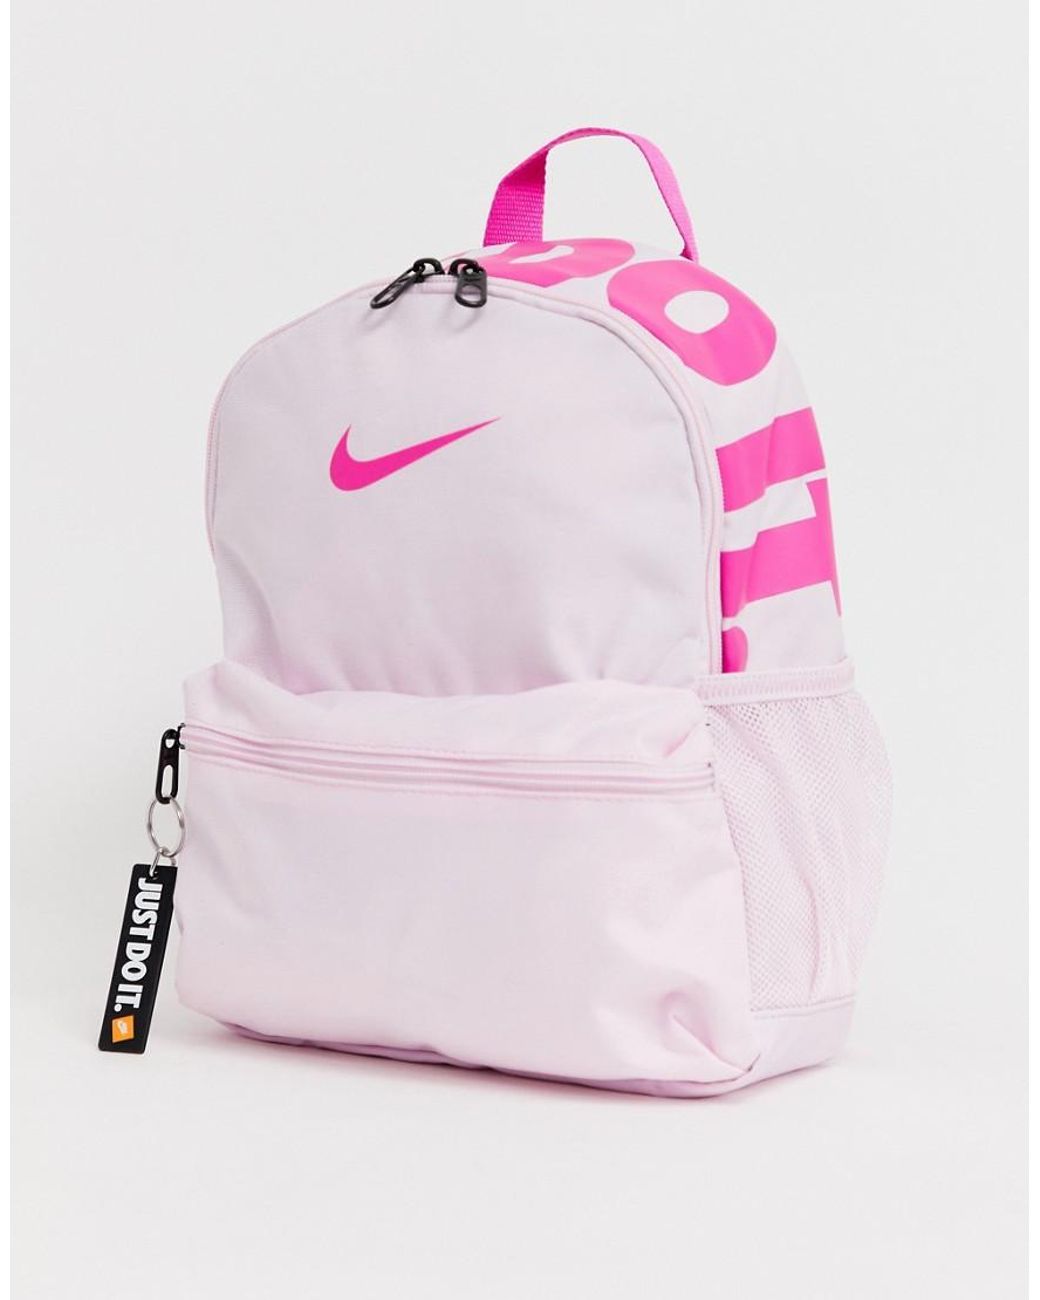 NEW Nike Just Do It Mini Hot Pink Backpack | Pink backpack, Pink bag,  Backpacks